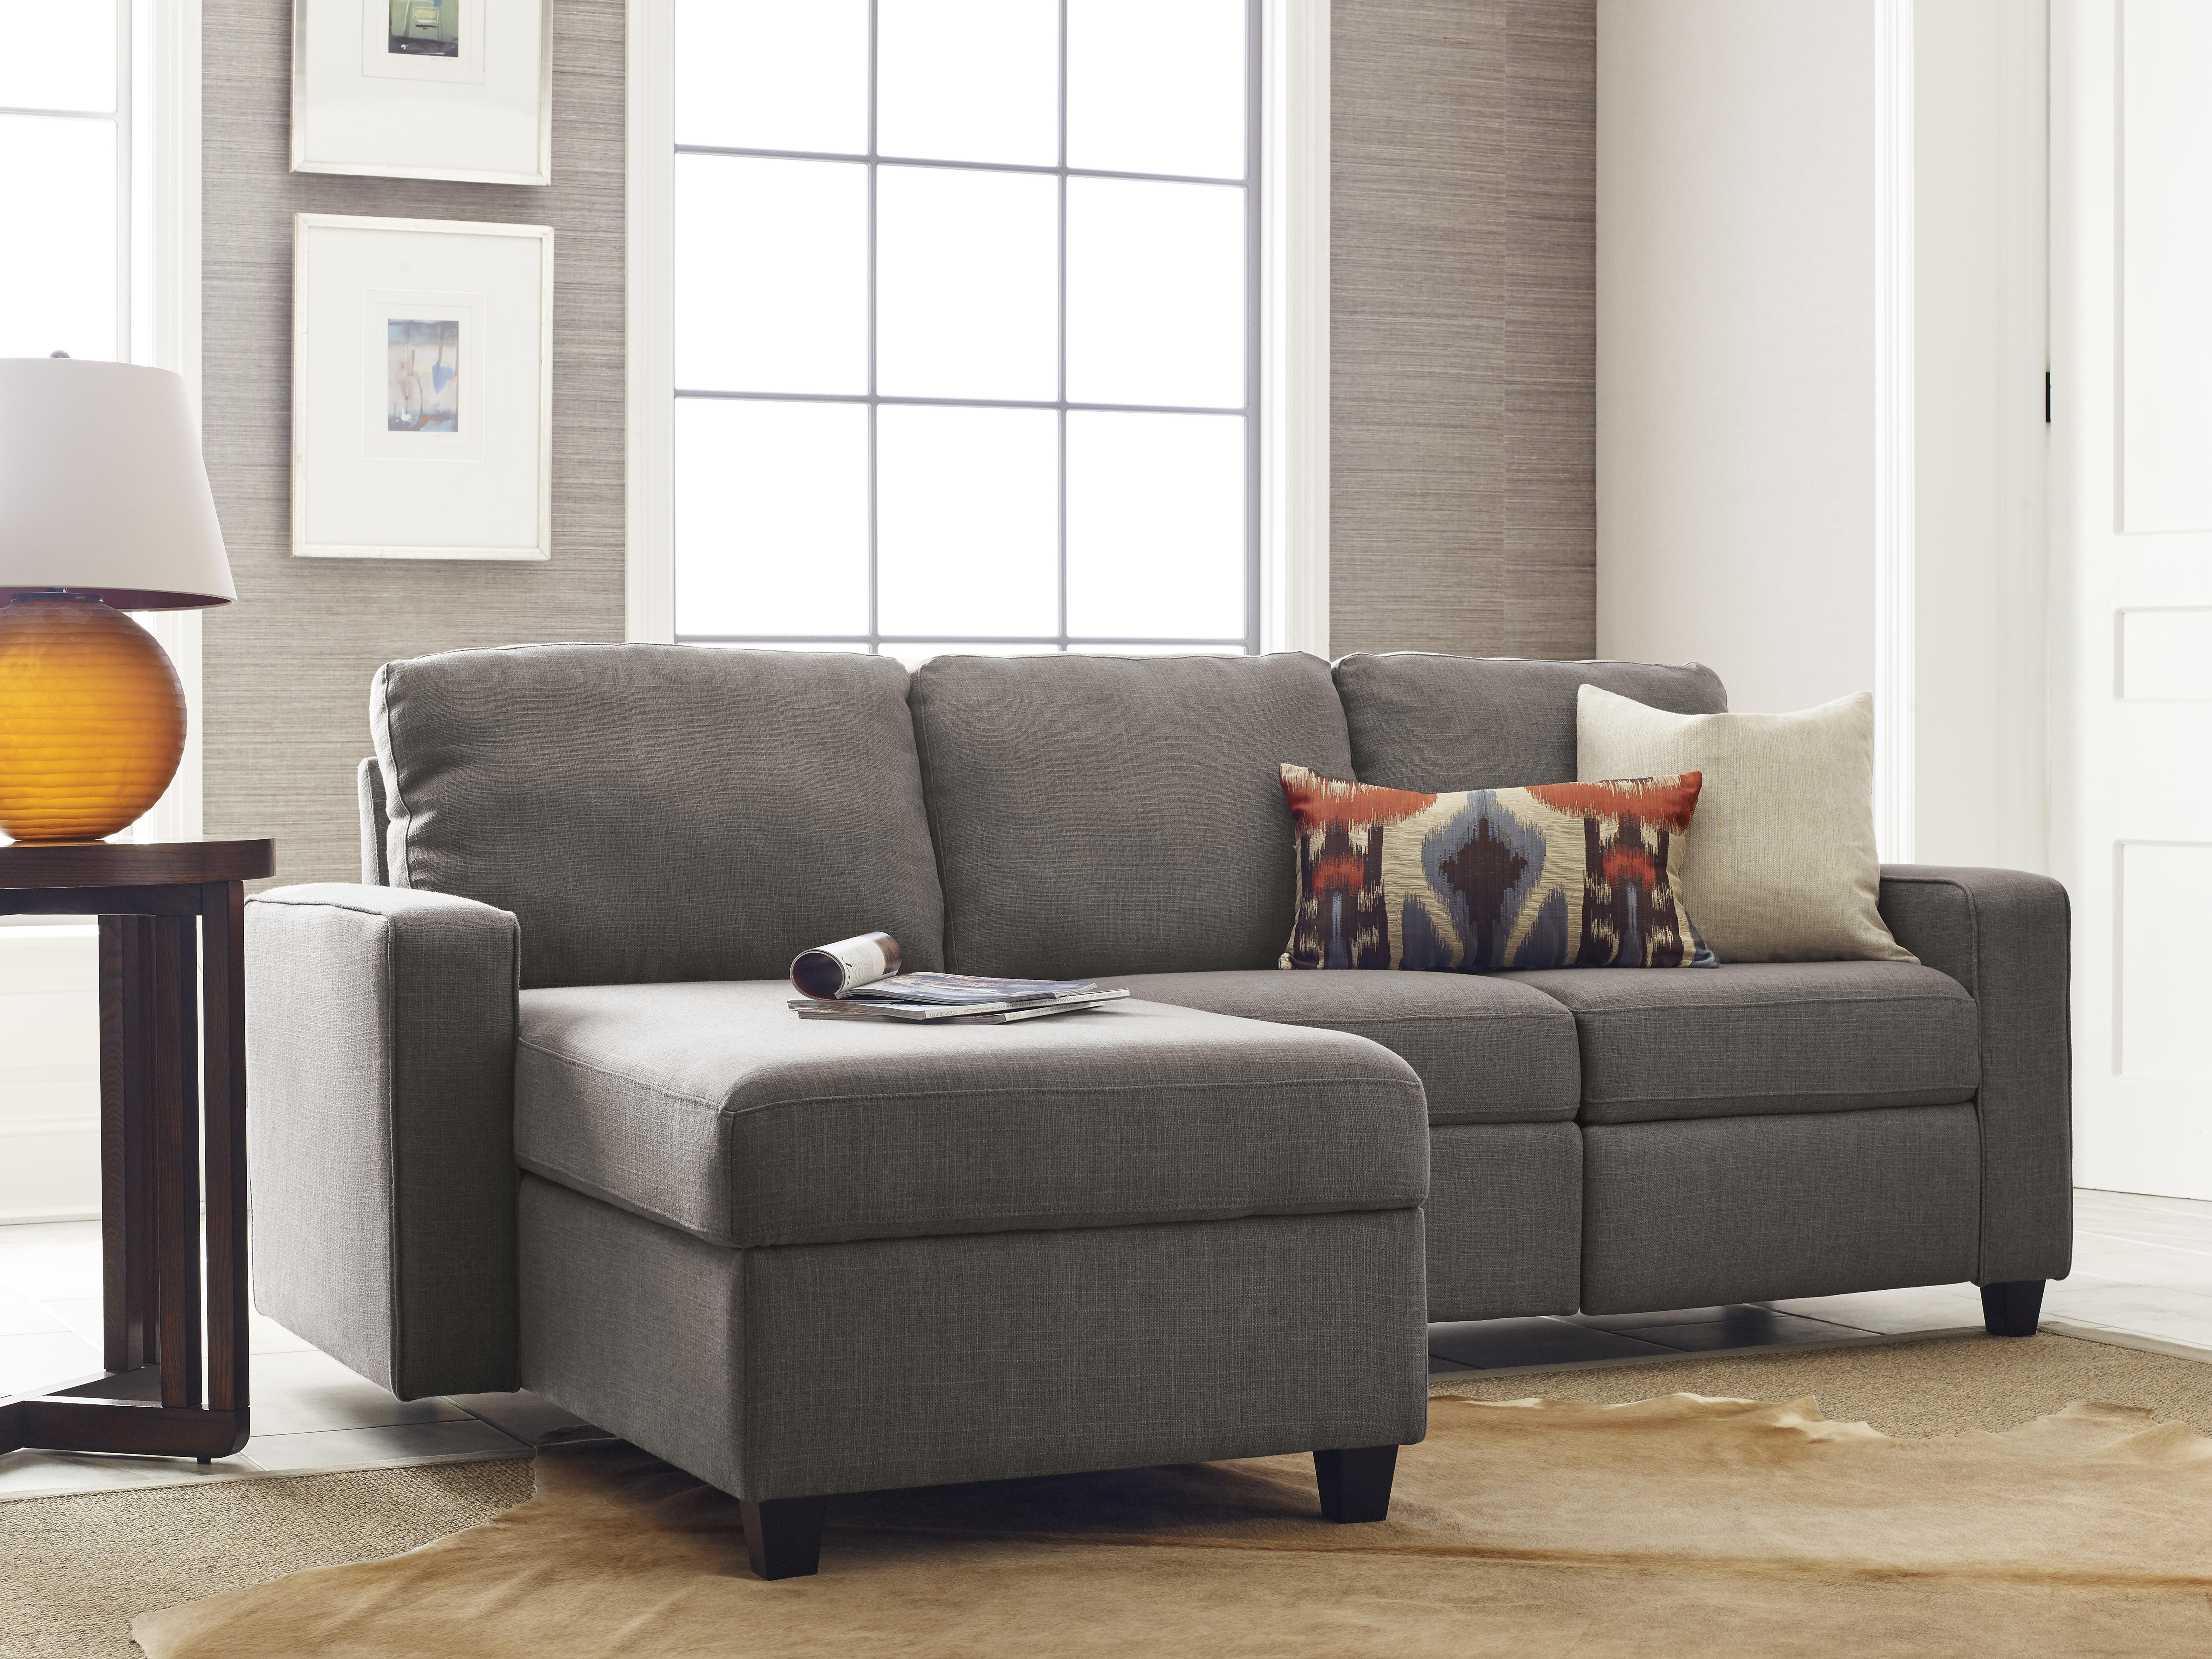 Serta Palisades Reclining Sectional with Left Storage Chaise - Gray - image 3 of 9